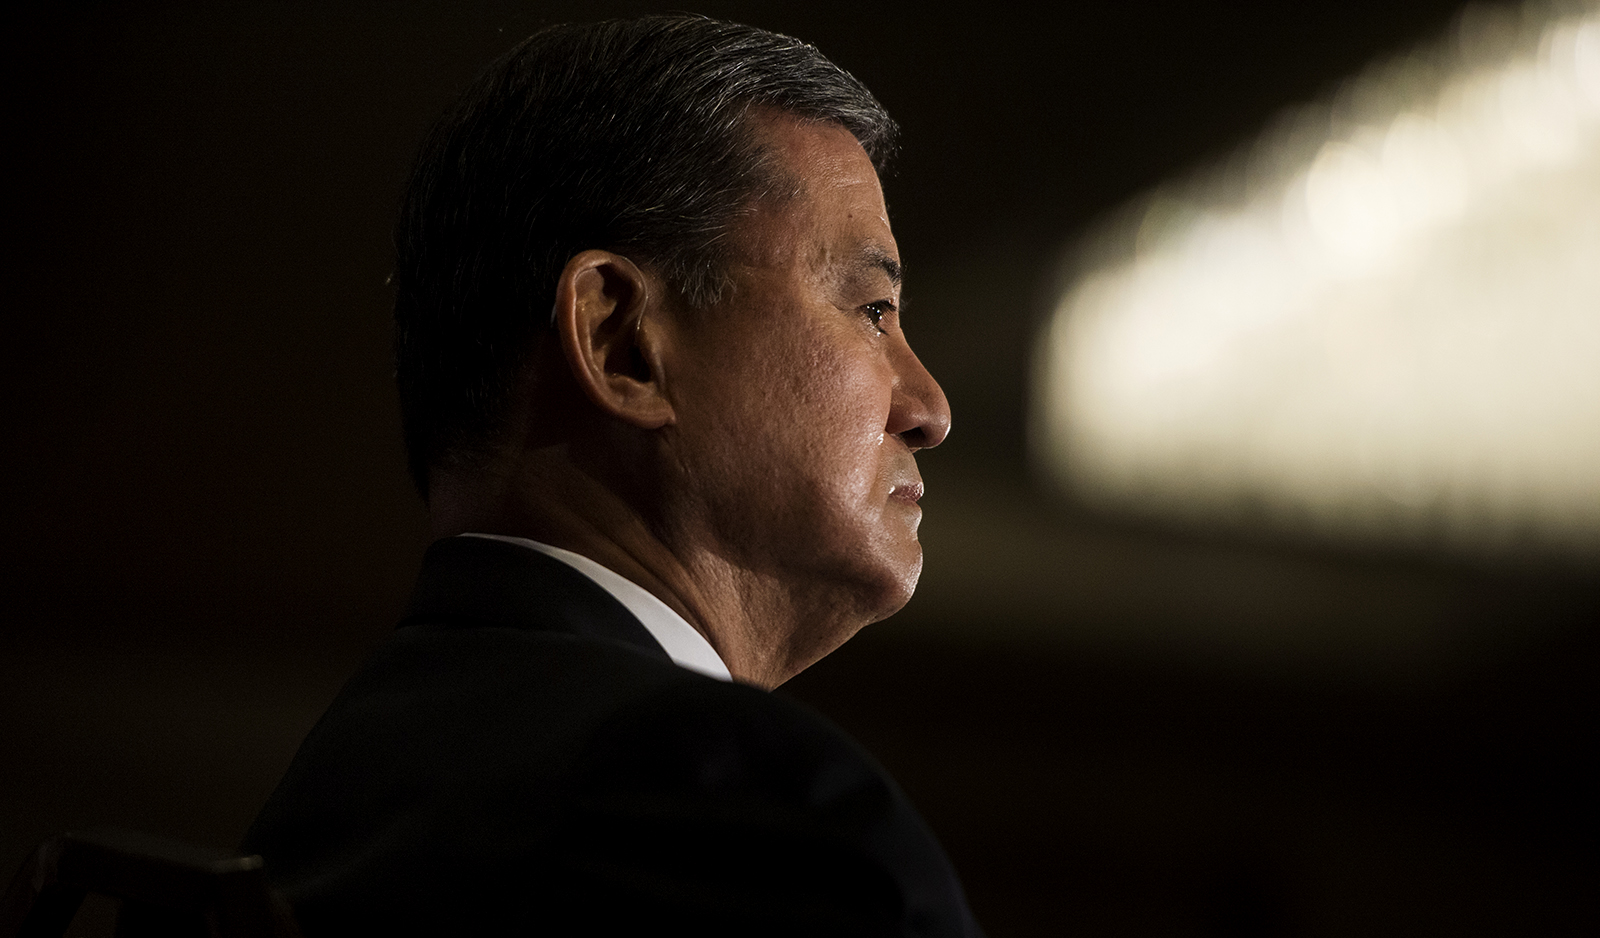 Veterans Affairs Secretary General Eric Shinseki retires after speaking at the National Coalition for Homeless Veterans Annual Conference in Washington, D.C., on Friday, May 30, 2014.© 2014 Nikki Kahn/The Washington Post ALL RIGHTS RESERVED